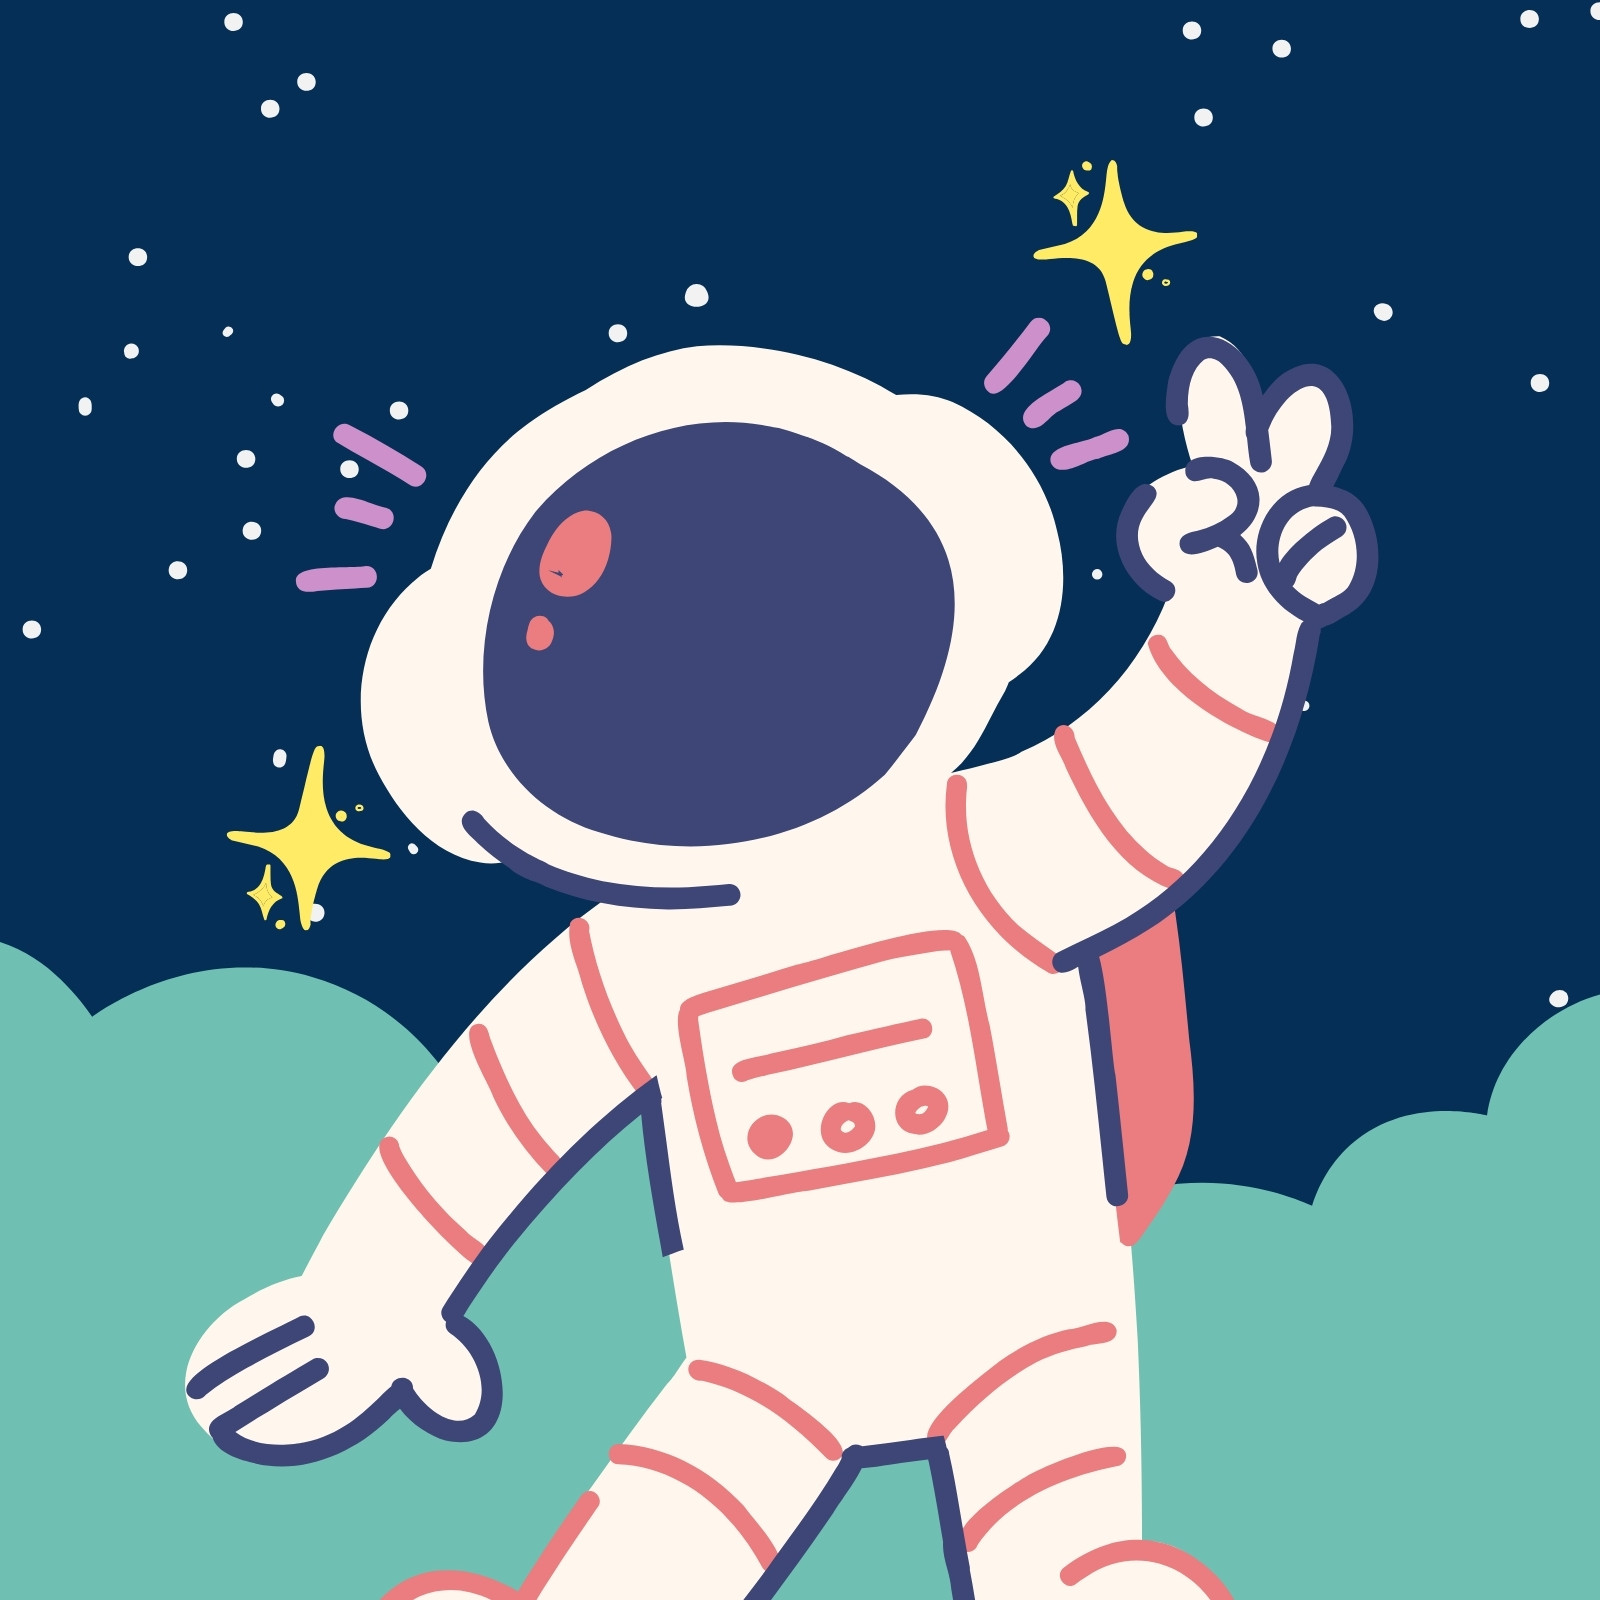 Blue and Green Playful Astronaut Illustrative Space Avatar